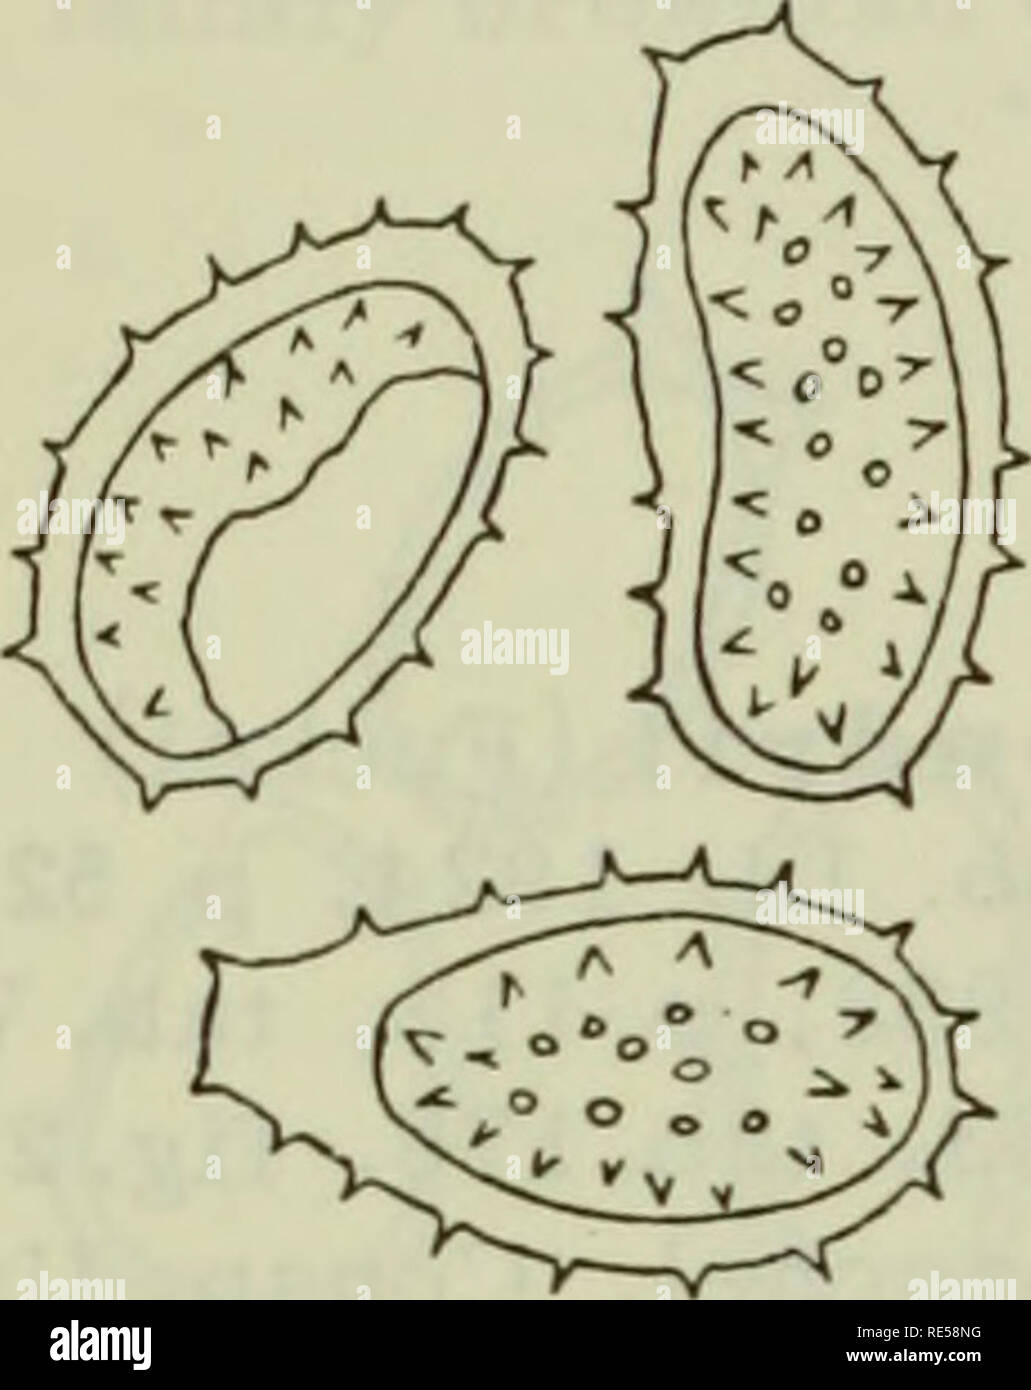 . Cryptogamic plants of the USSR. (Flora sporovykh rastenii SSSR). Plants. Uredia round, 0.1—0.3 mm across, subepidermal, scattered or loosely grouped, frequently in rows between the lateral veins on olive or brown areas of indefinite extent; peridium hemispherical, delicate; peridial cells isodiametric to somewhat elongate in the upper part of the peridium, radially elongate near base of peridium, with walls up to 1/u thick. Uredio- spores on pedicels up to 16/u long, obovoid or ellipsoid, 2 8 — 57 X 14—2 3/u (averaging about 37 X 19ju); spore wall 0.5 —1.5/l( thick, quite strongly and rather Stock Photo